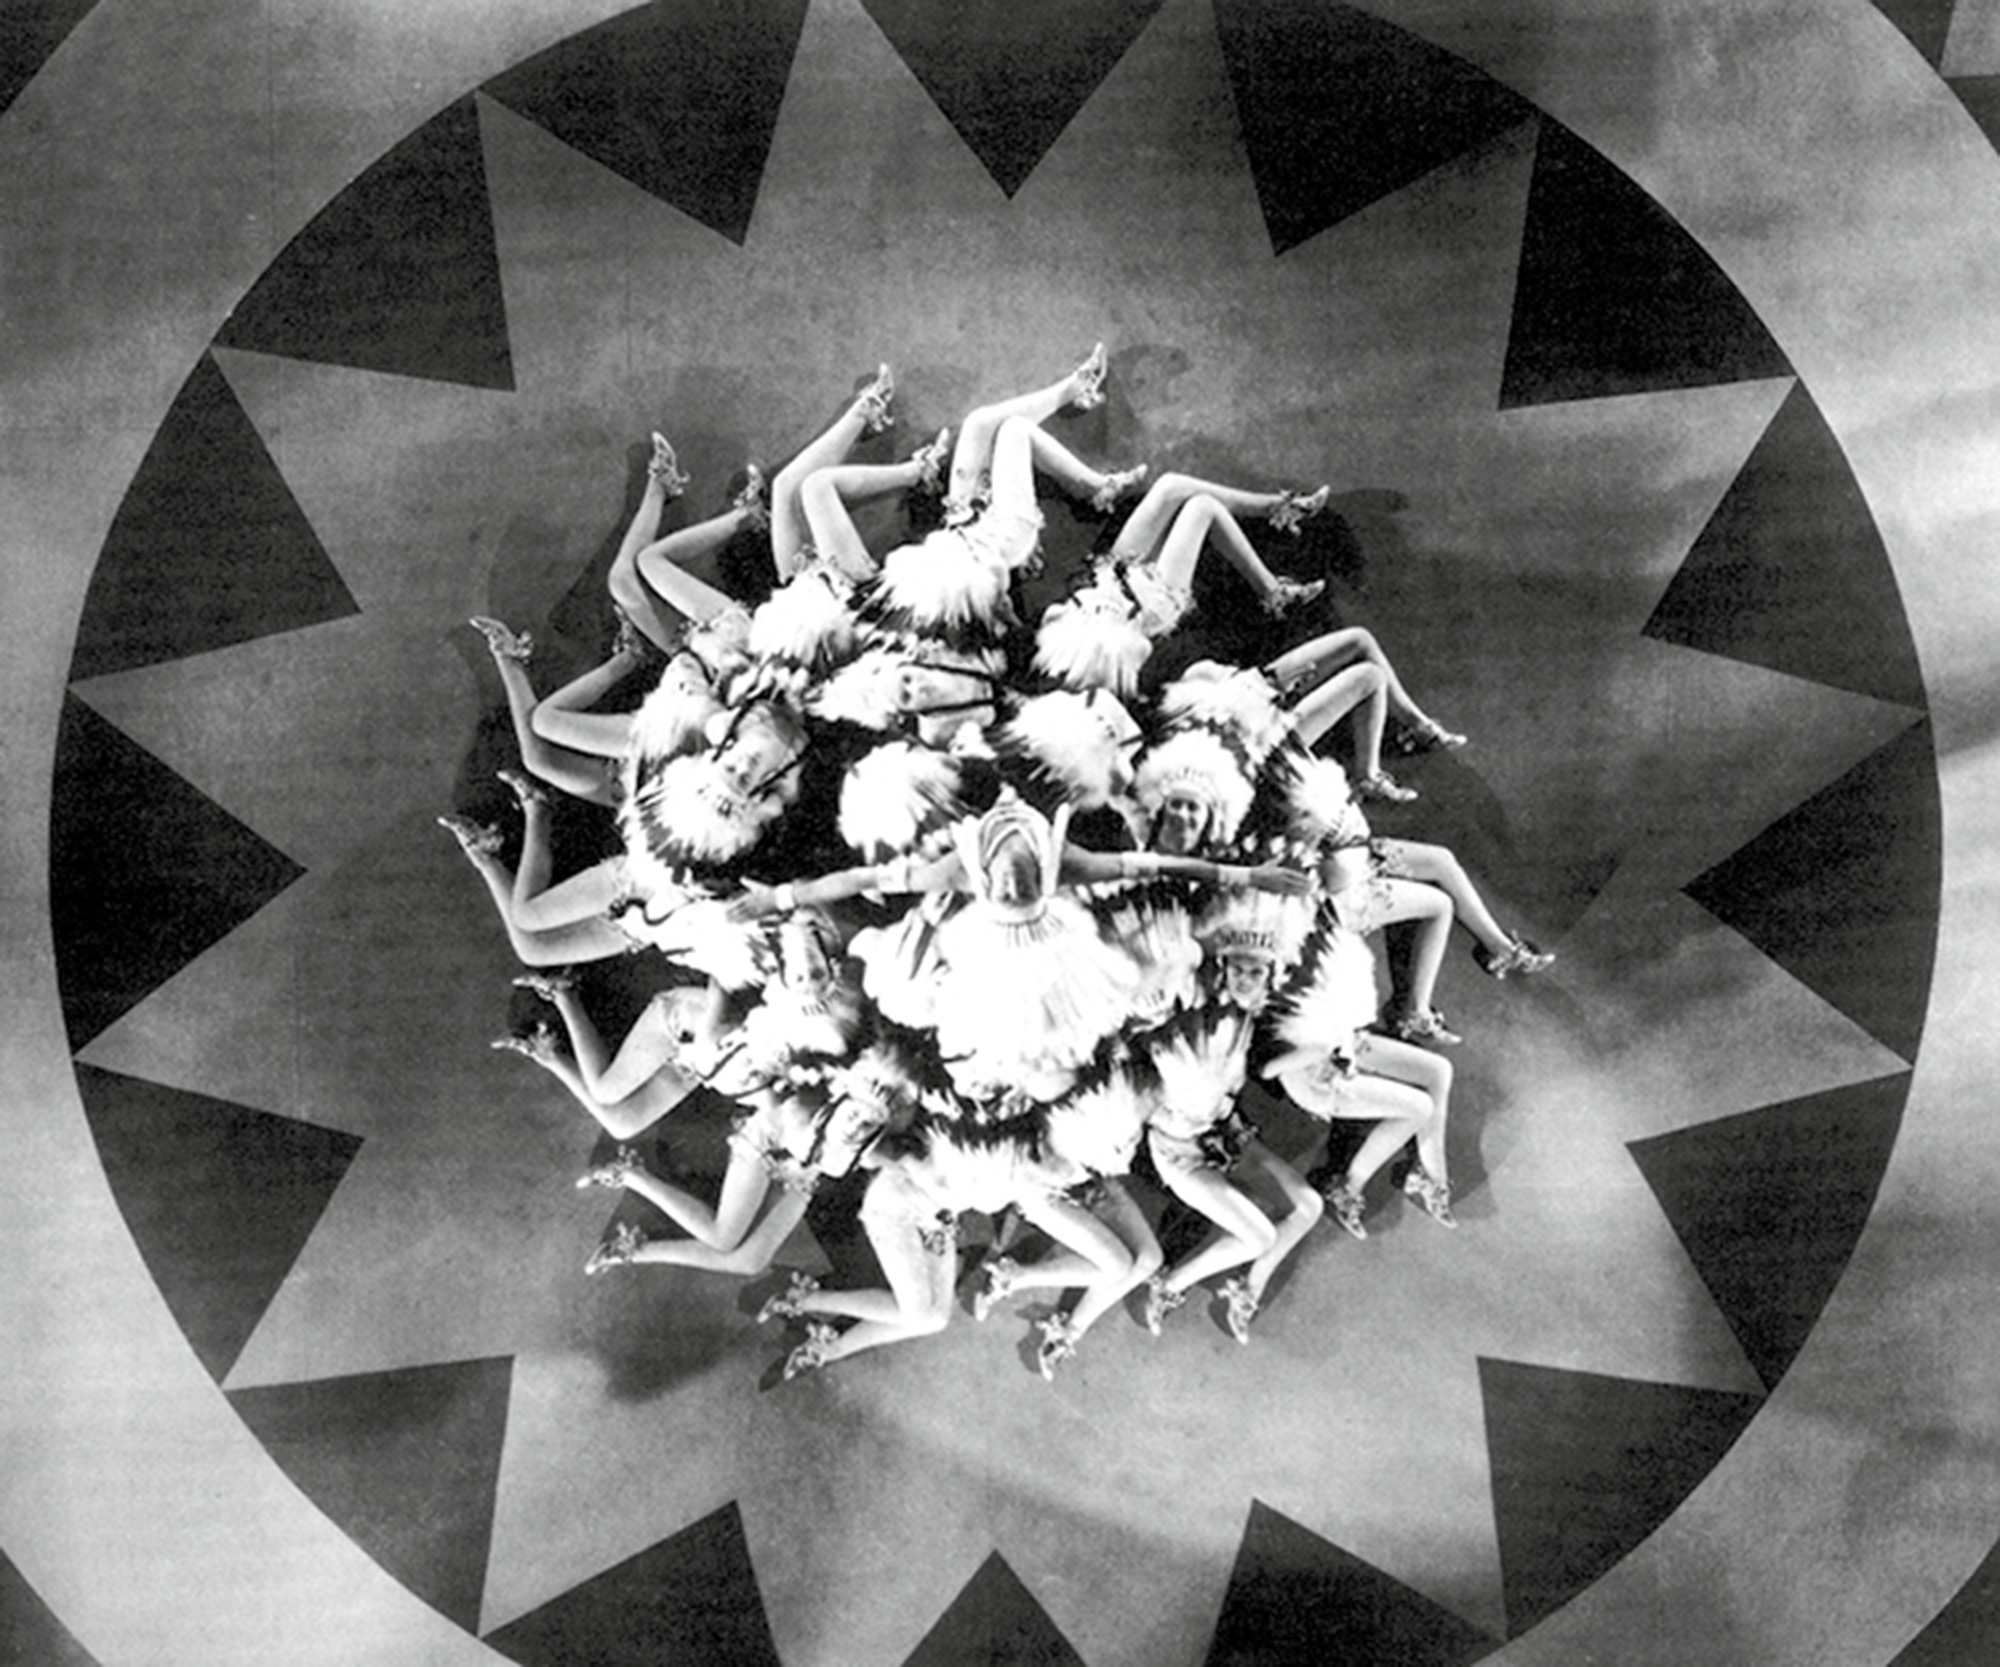 A still from the nineteen thirties film “Whoopee!,” directed by Busby Berkeley.